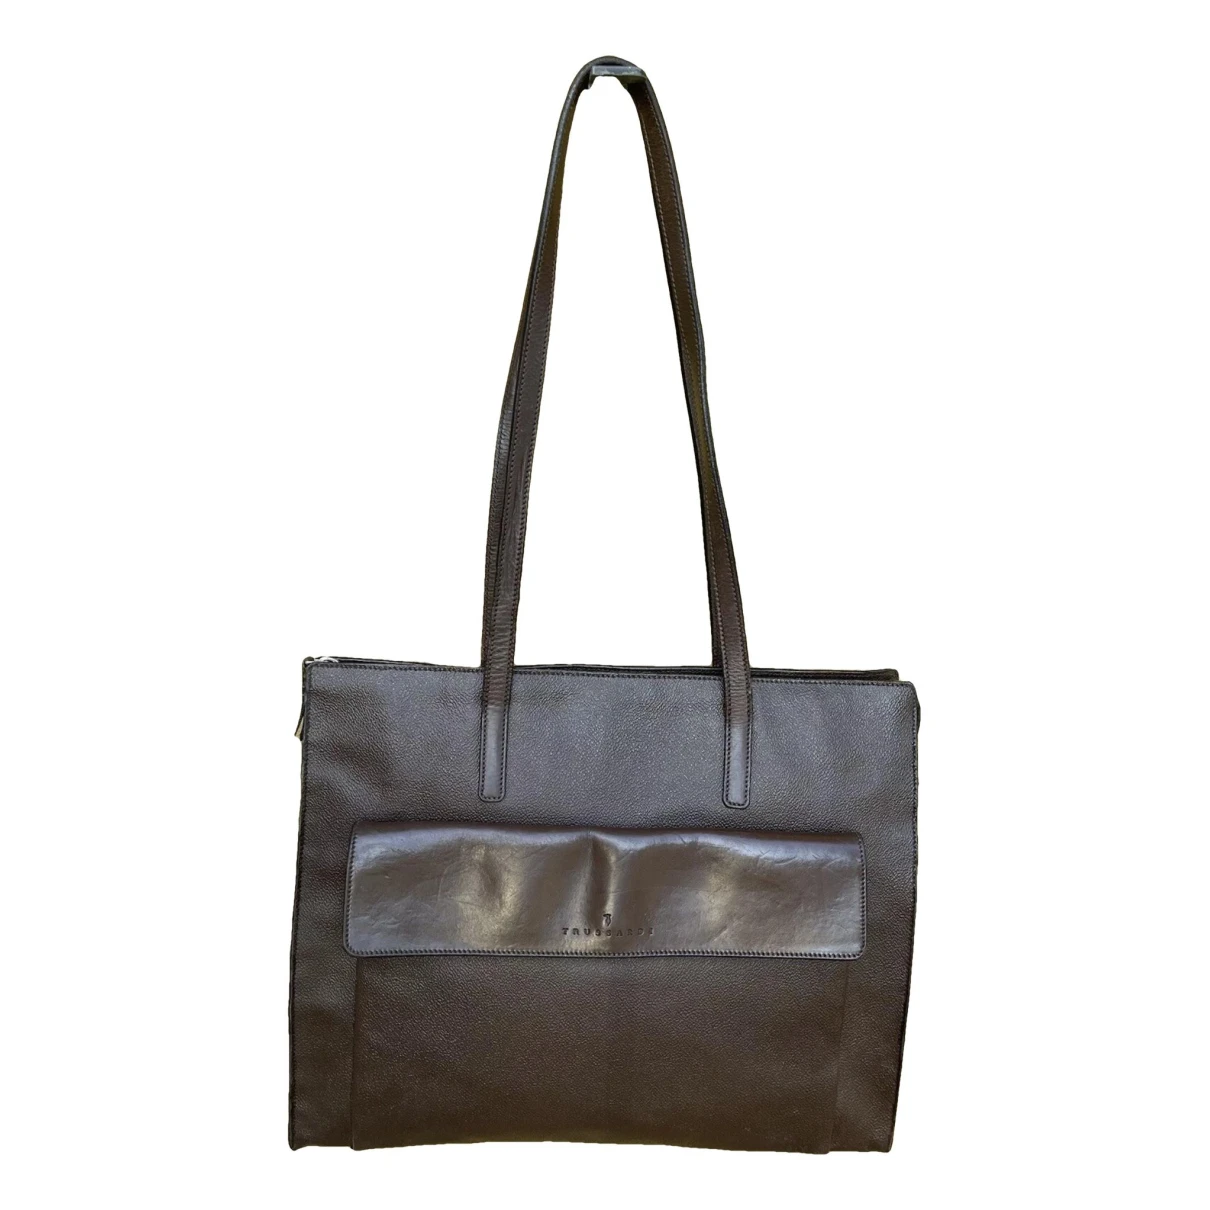 Pre-owned Trussardi Leather Tote In Brown